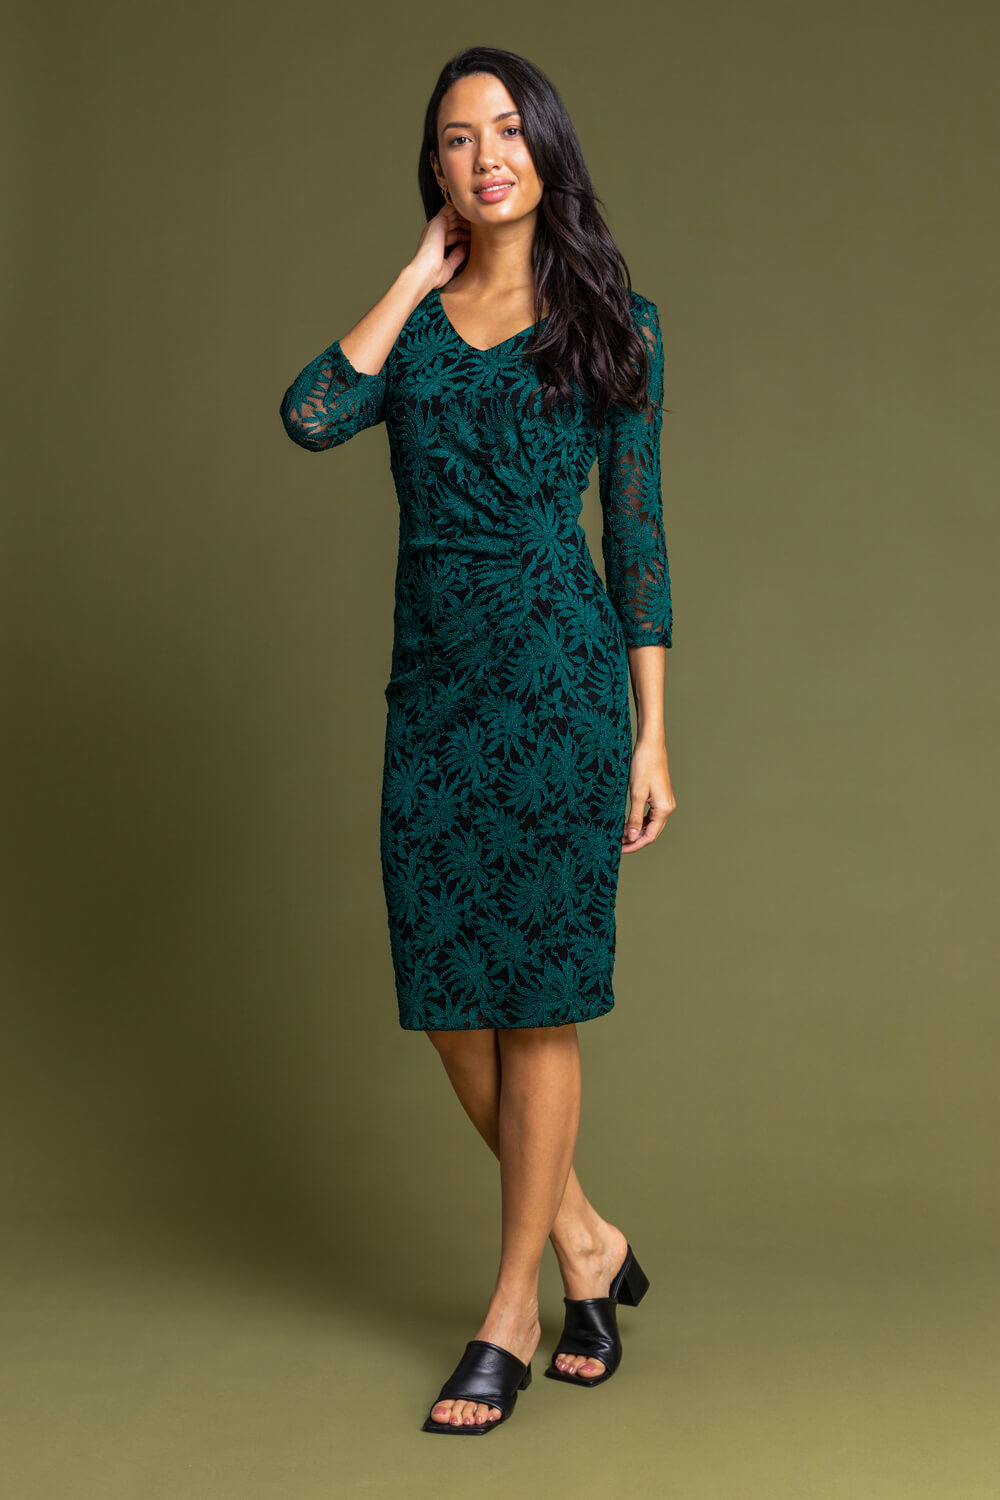 Green Palm Print Lace Ruched Dress, Image 3 of 4